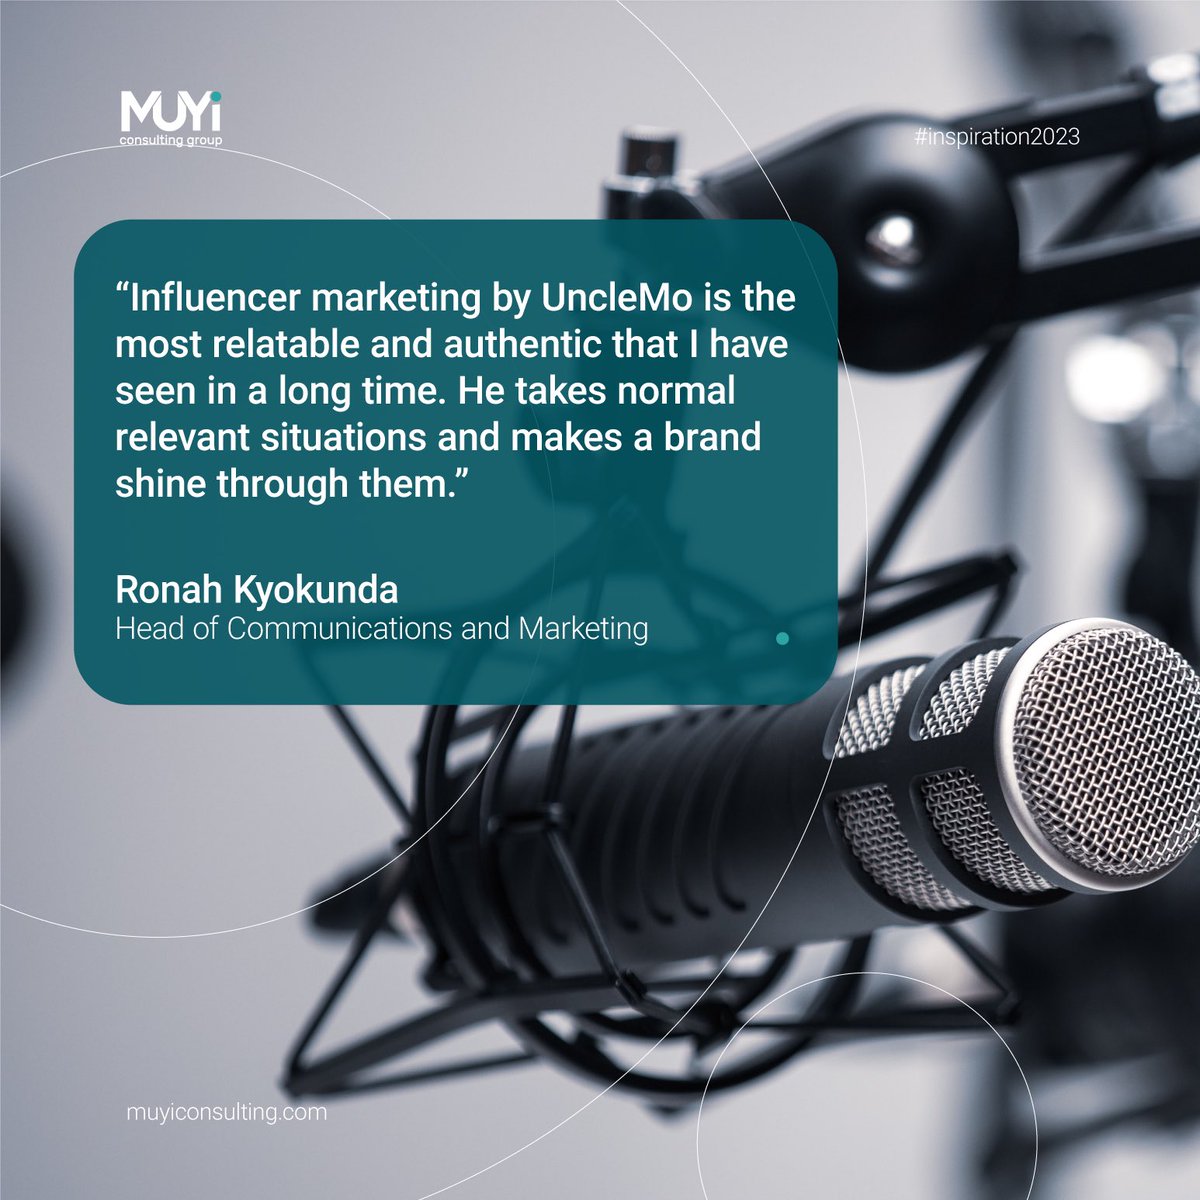 Influencer marketing is still a growing and ever changing aspect of marketing.
Let’s appreciate and be inspired by people who keep getting it right!
#communications #managementconsulting #inspiration2023 #influencermarketing